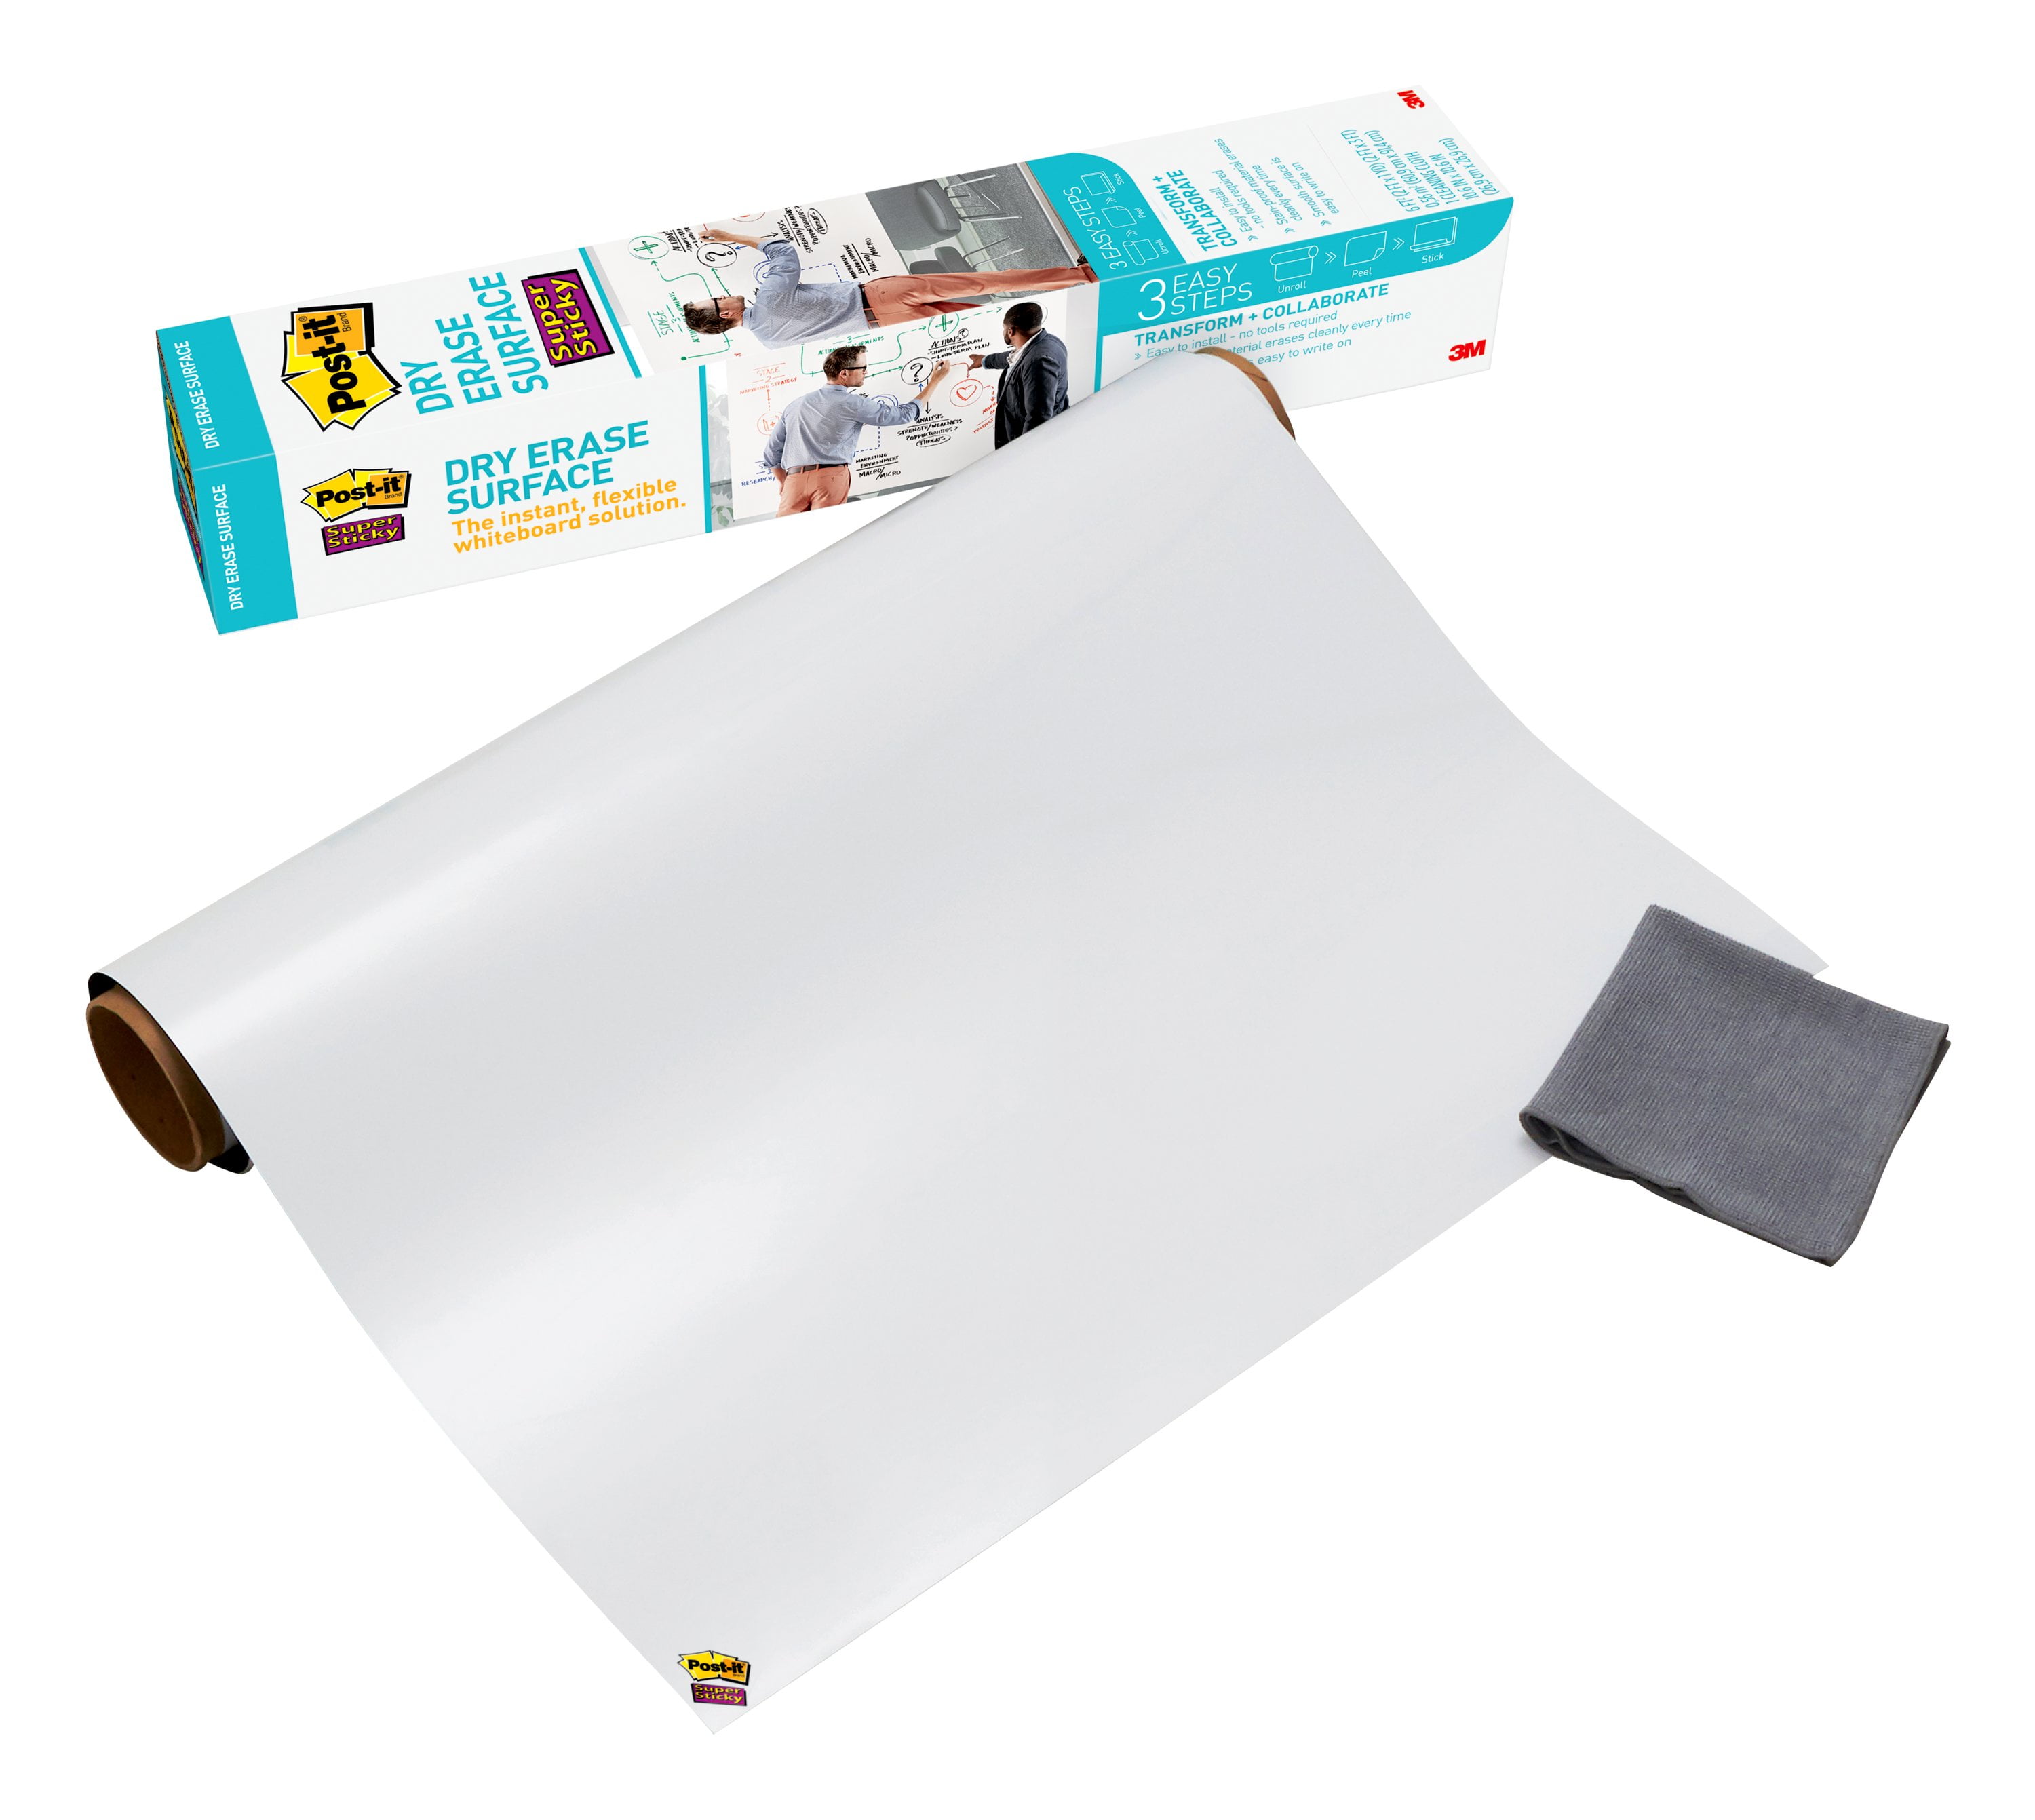 Whiteboard Film DEF3x2 3M Post-it Dry Erase Surface Brand new 2' x 3' 